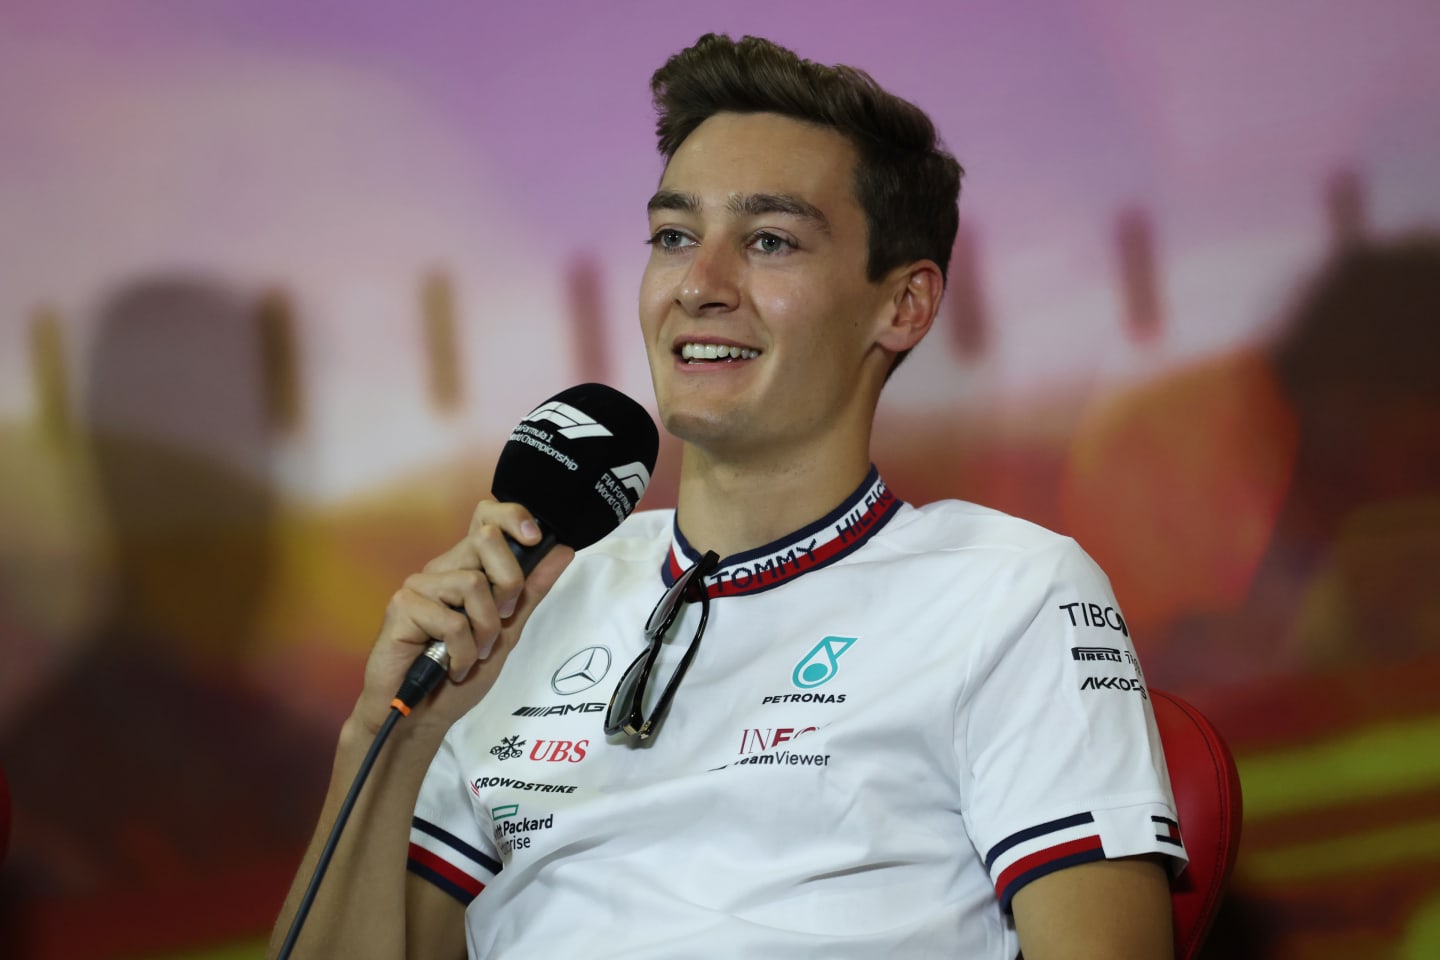 BARCELONA, SPAIN - MAY 20: George Russell of Great Britain and Mercedes talks in the Drivers Press Conference prior to practice ahead of the F1 Grand Prix of Spain at Circuit de Barcelona-Catalunya on May 20, 2022 in Barcelona, Spain. (Photo by Bryn Lennon/Getty Images)